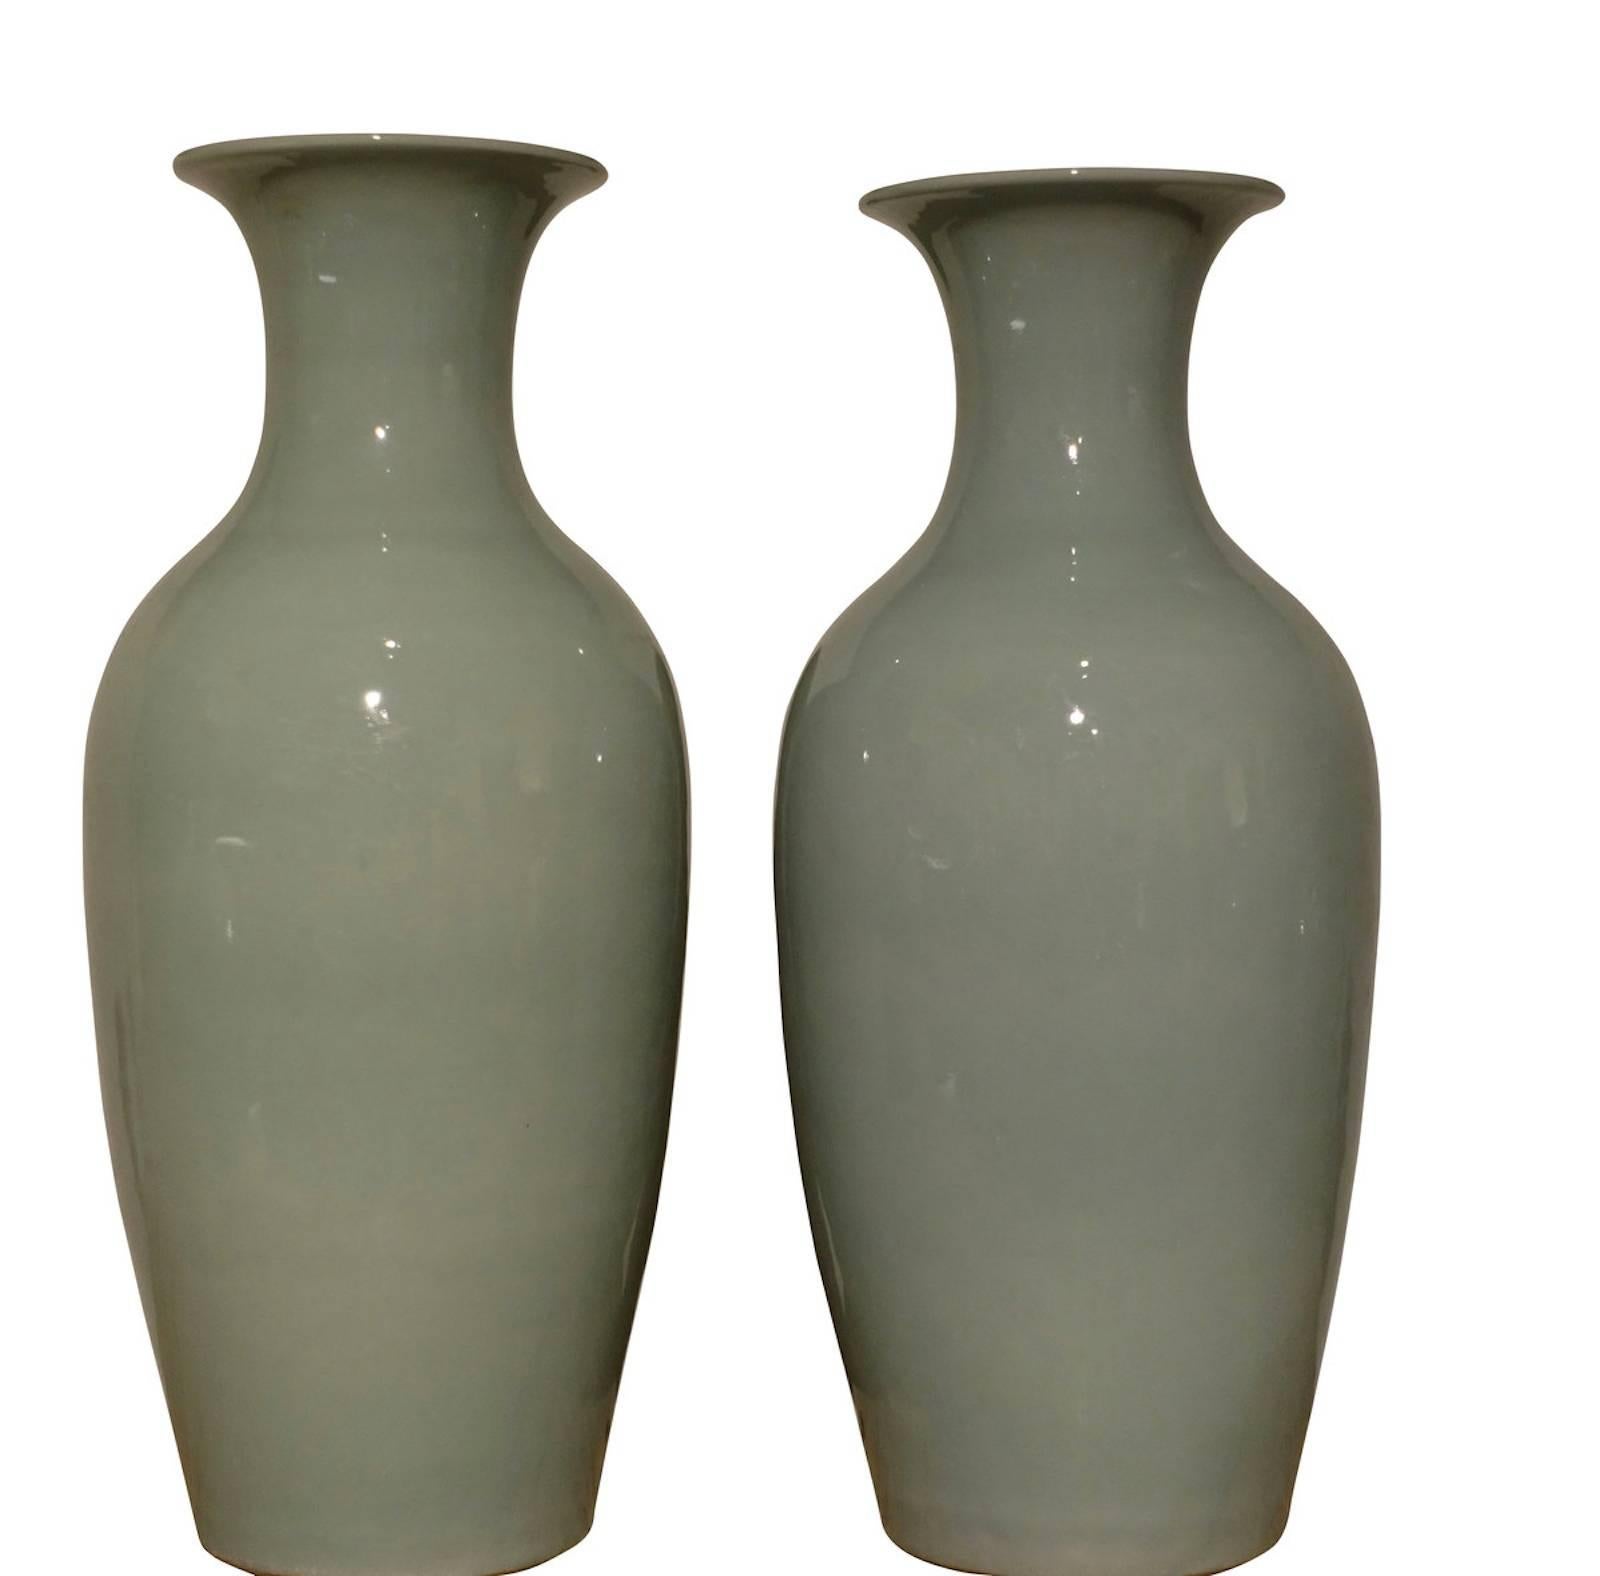 Contemporary Chinese collection of clear pale turquoise glazed vases in Classic shapes.
Size range 5 inches diameter to 6.5 inches diameter 
 5.5 inches tall to 11 inches tall
Sold individually.
 